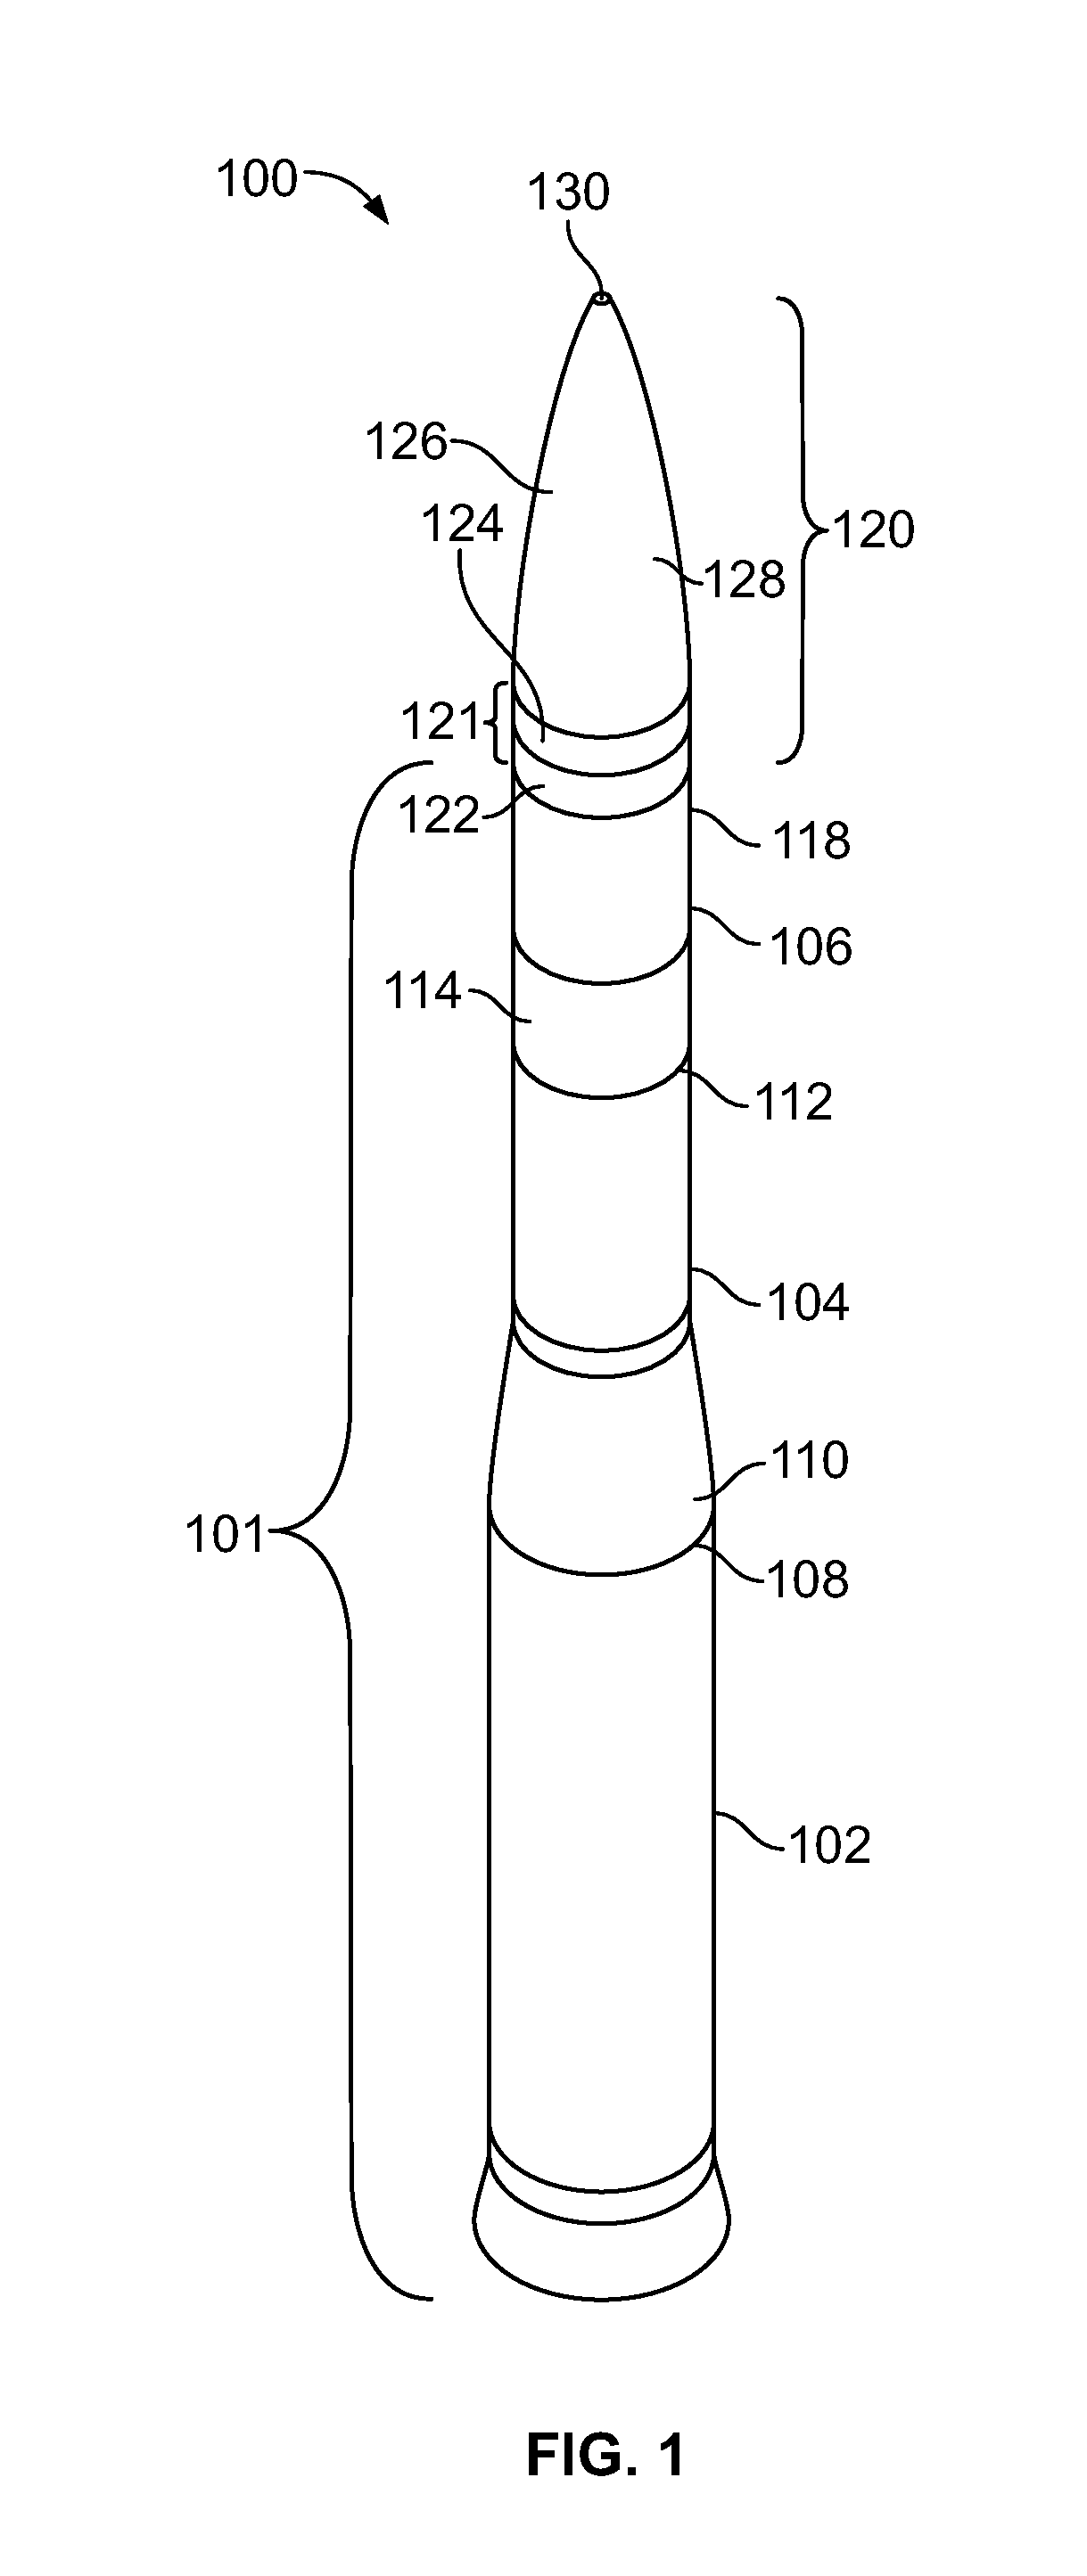 Methods of connecting testing equipment to a missile system